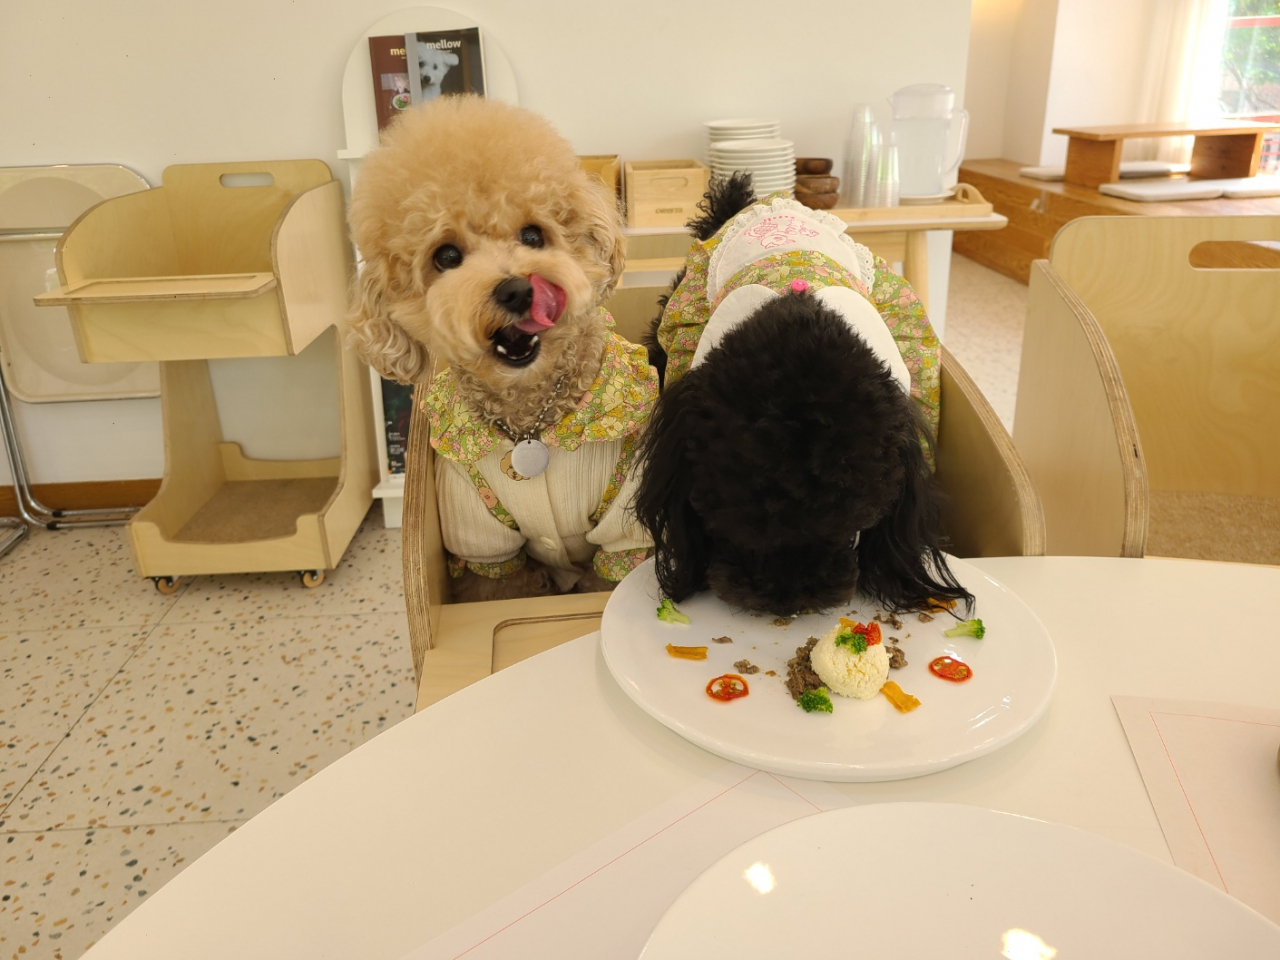 Dogs enjoy their full course meals at Pet Dining Mamma in Songpa-gu, eastern Seoul. (Jung Min-kyung/ The Korea Herald)